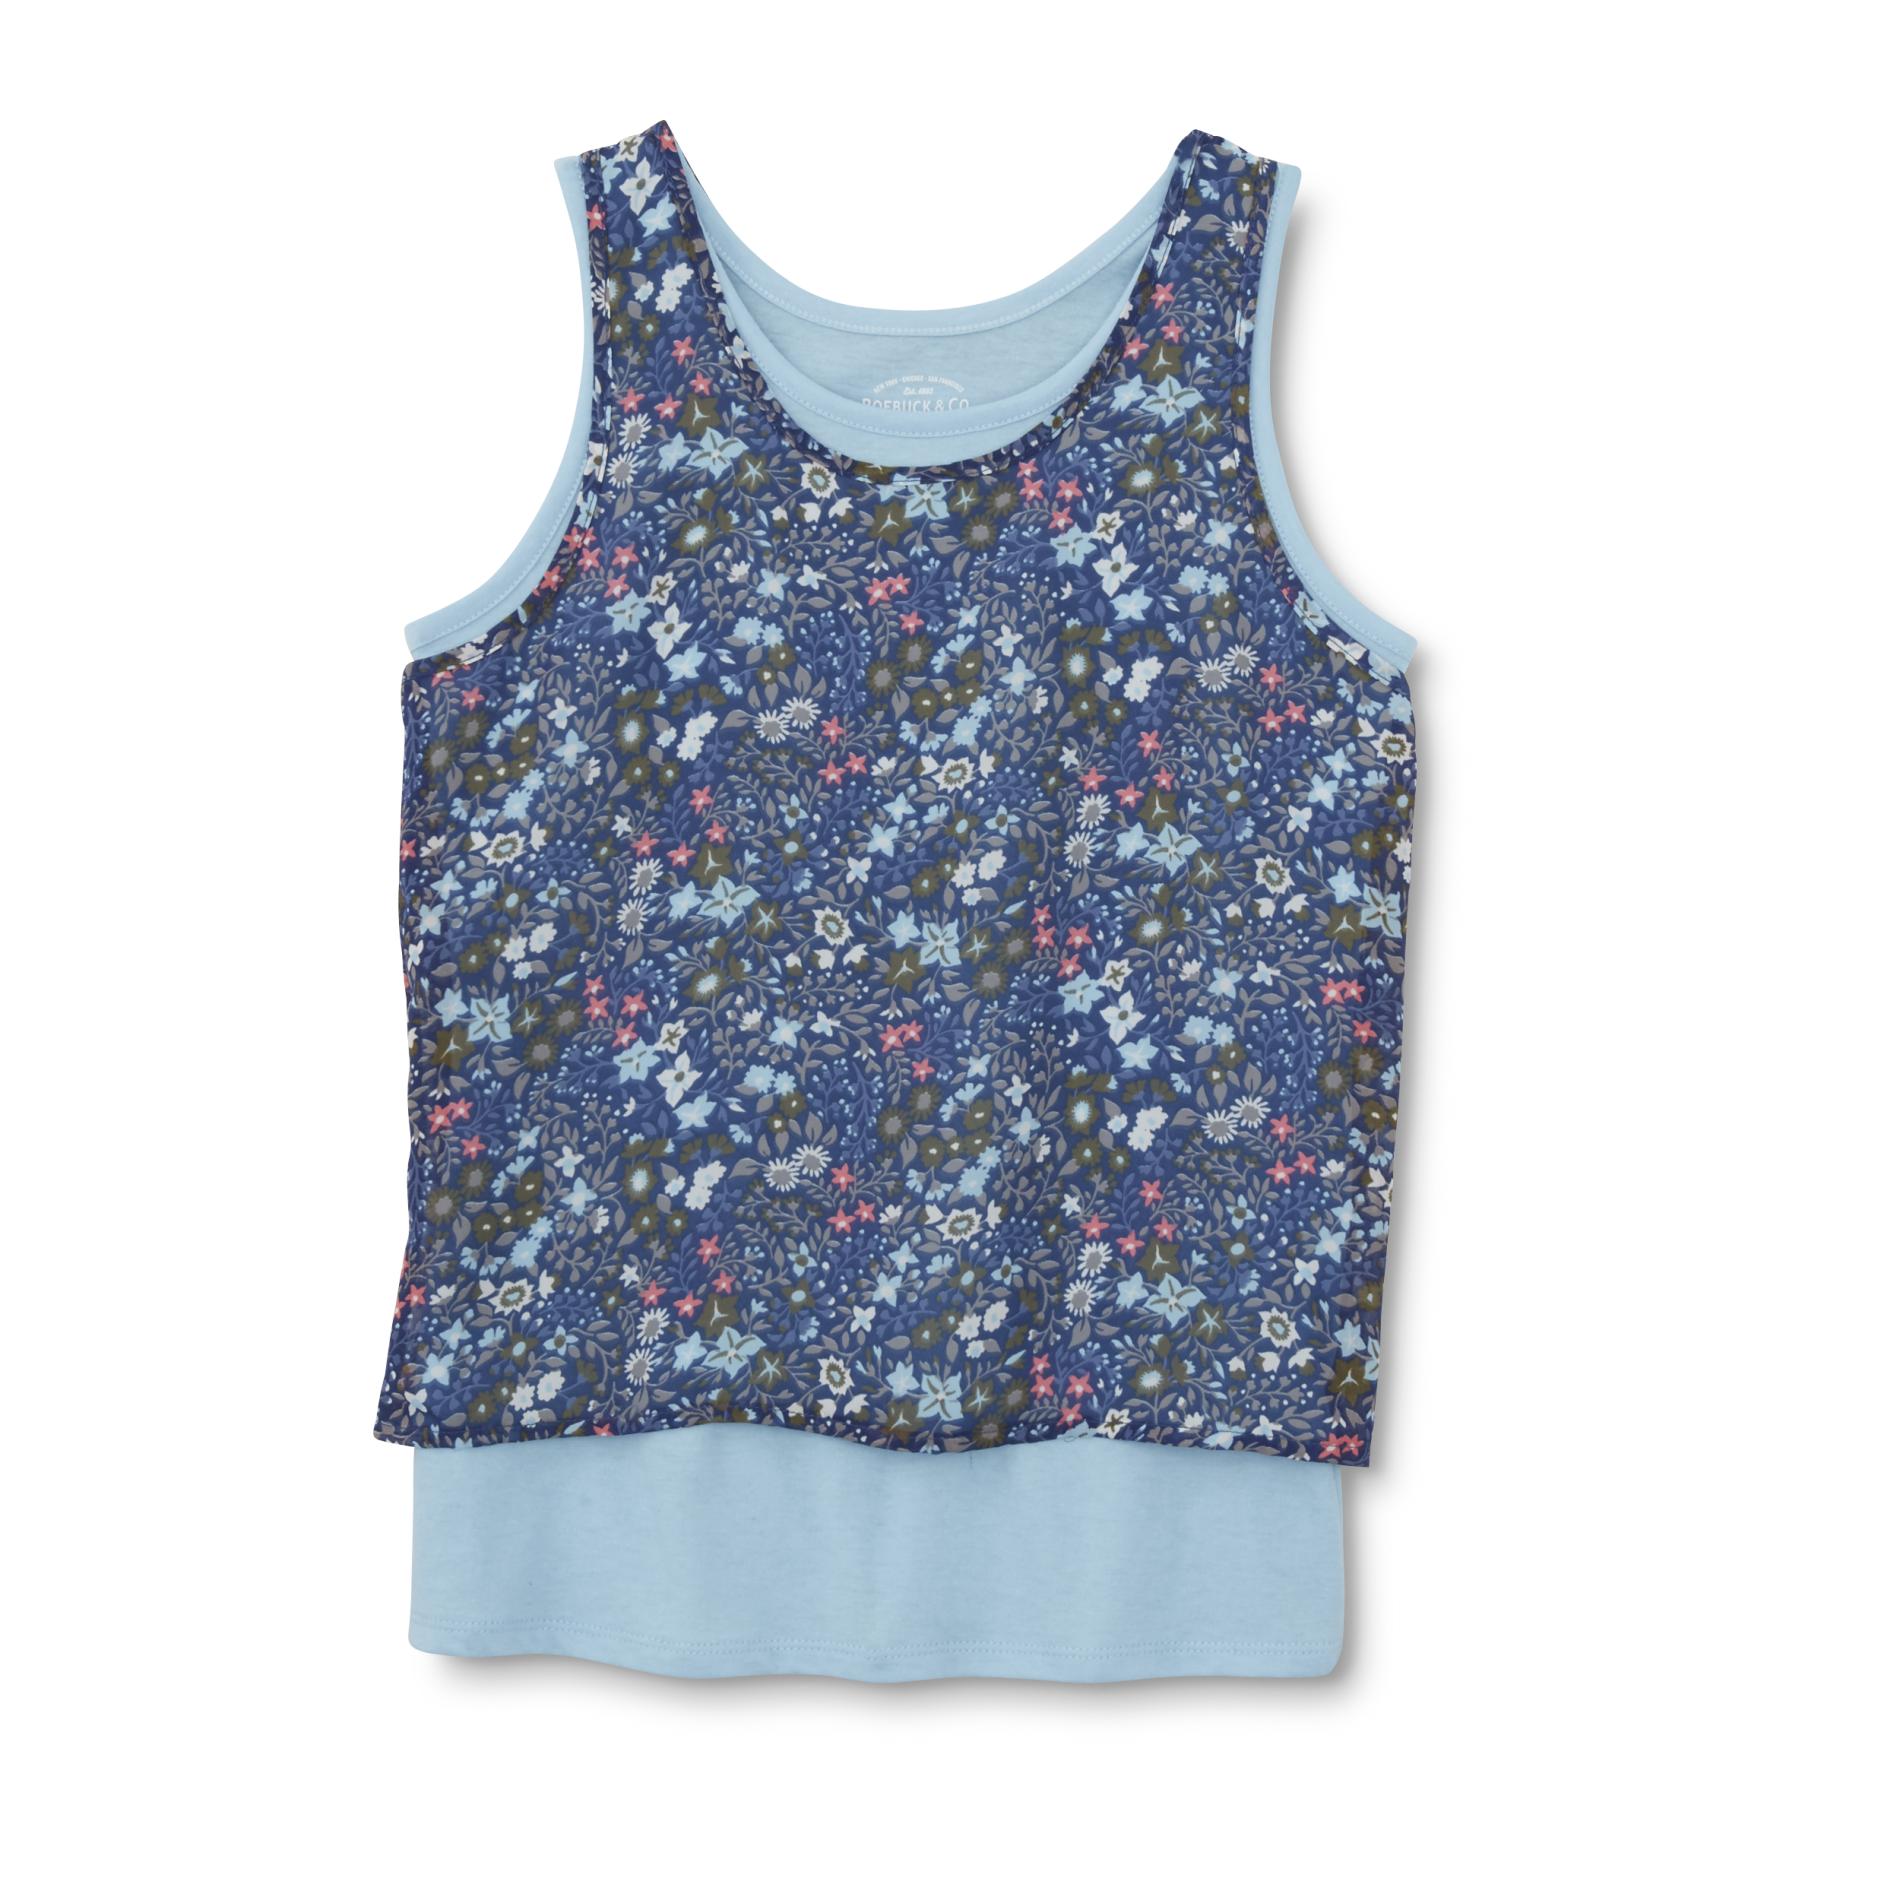 ROEBUCK & CO R1893 Girl's Layered-Look Tank Top - Floral Print